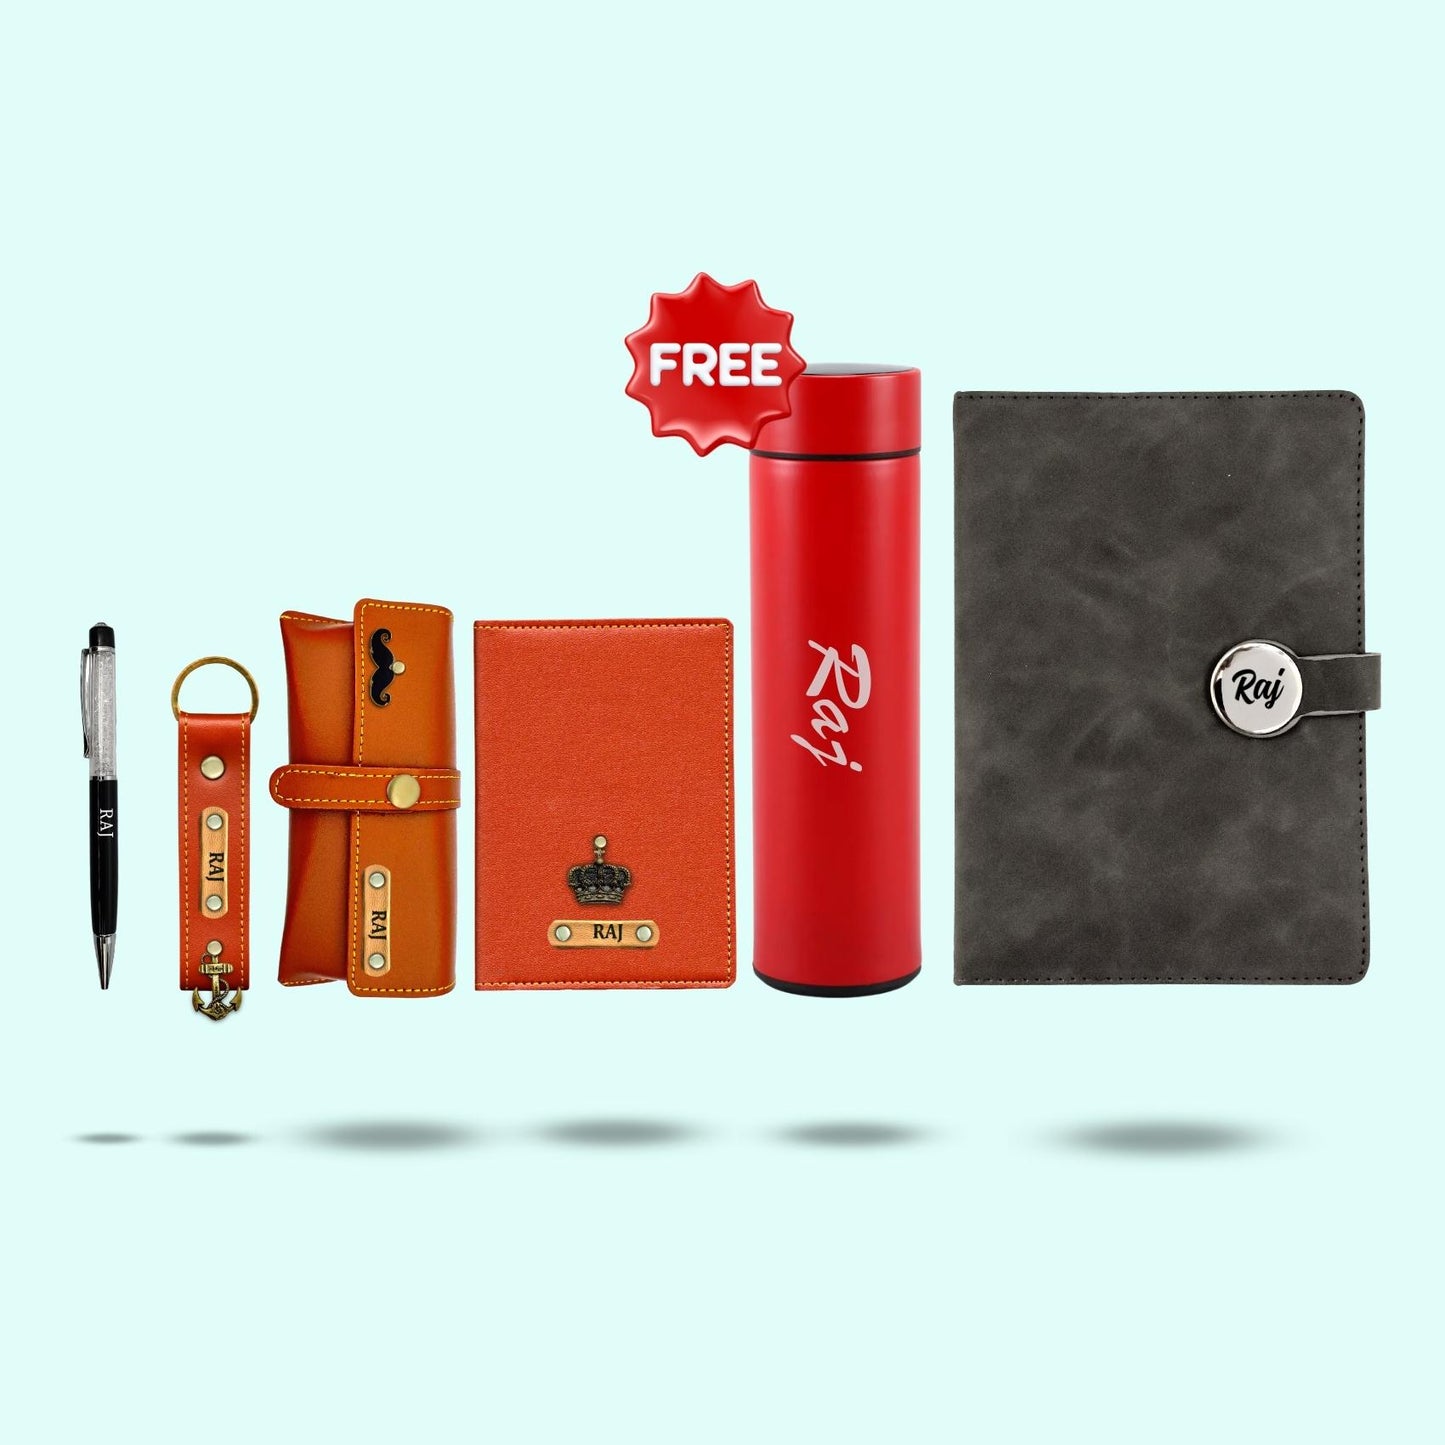 Personalized 6-in-1 Gift Set For Men and Women - Includes 1 Free Temperature Bottle